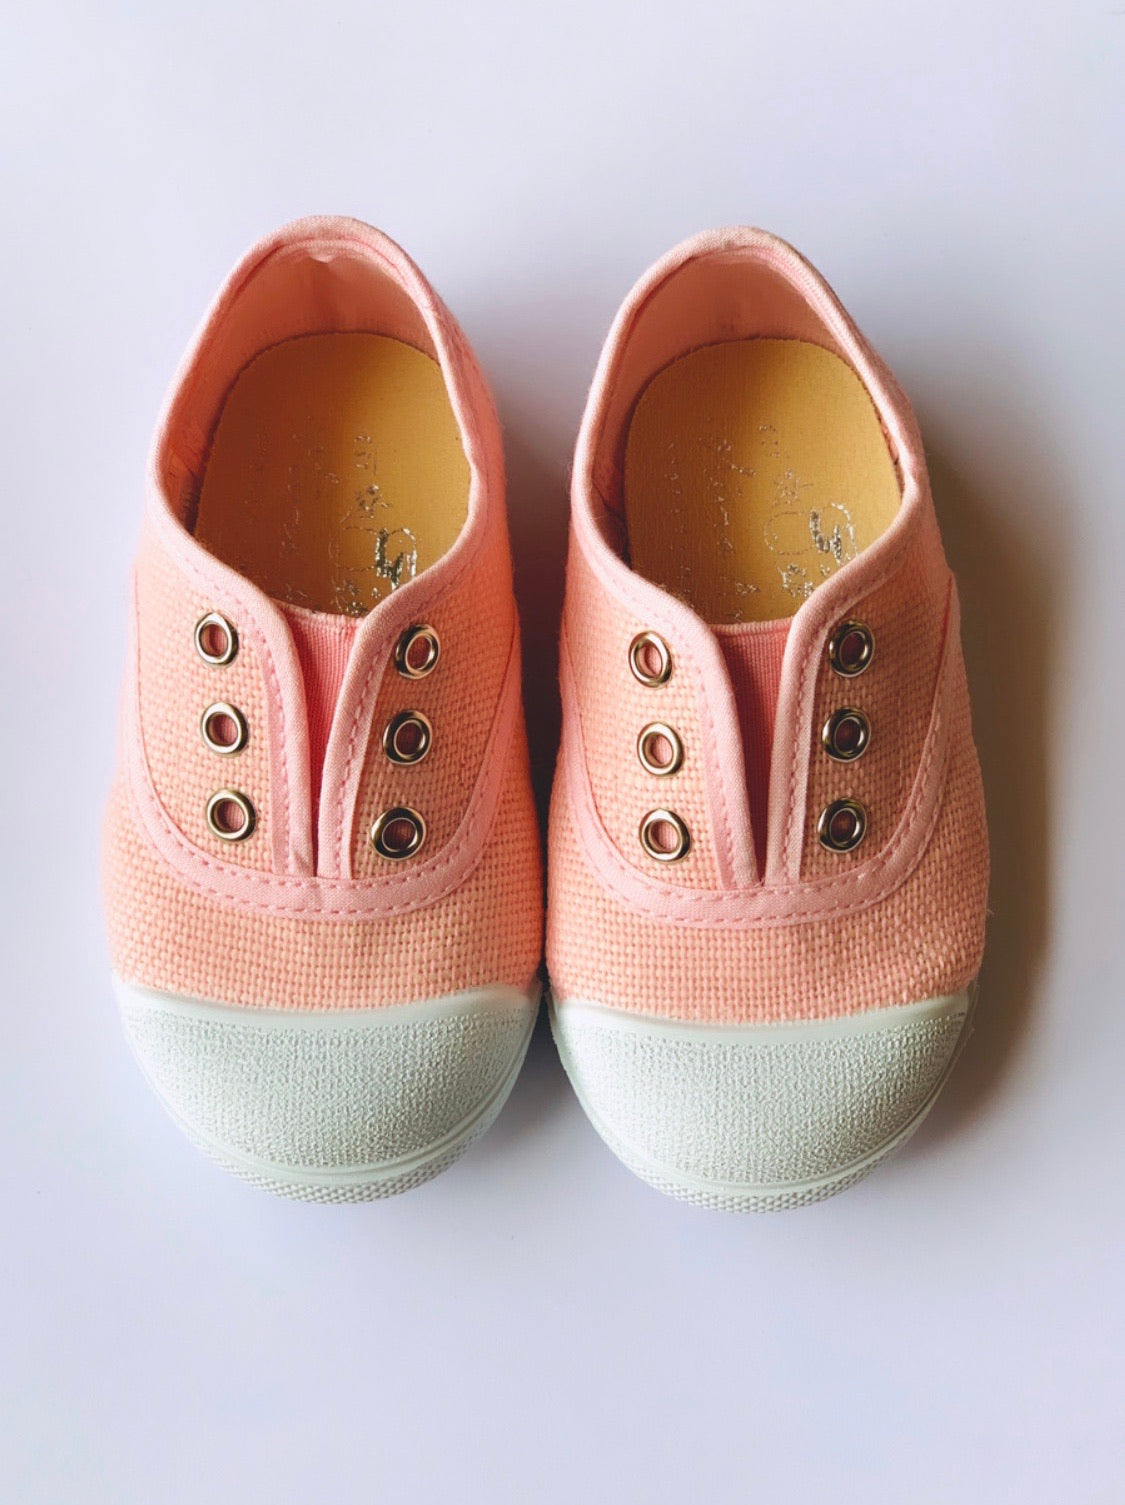 Our OLIVIA ANN soft canvas shoes have a new and improved material that is supersoft and comfortable, and perfect for speedy slip-ons when there's a game in the garden that can't wait.  Sneakers. Plimsoles